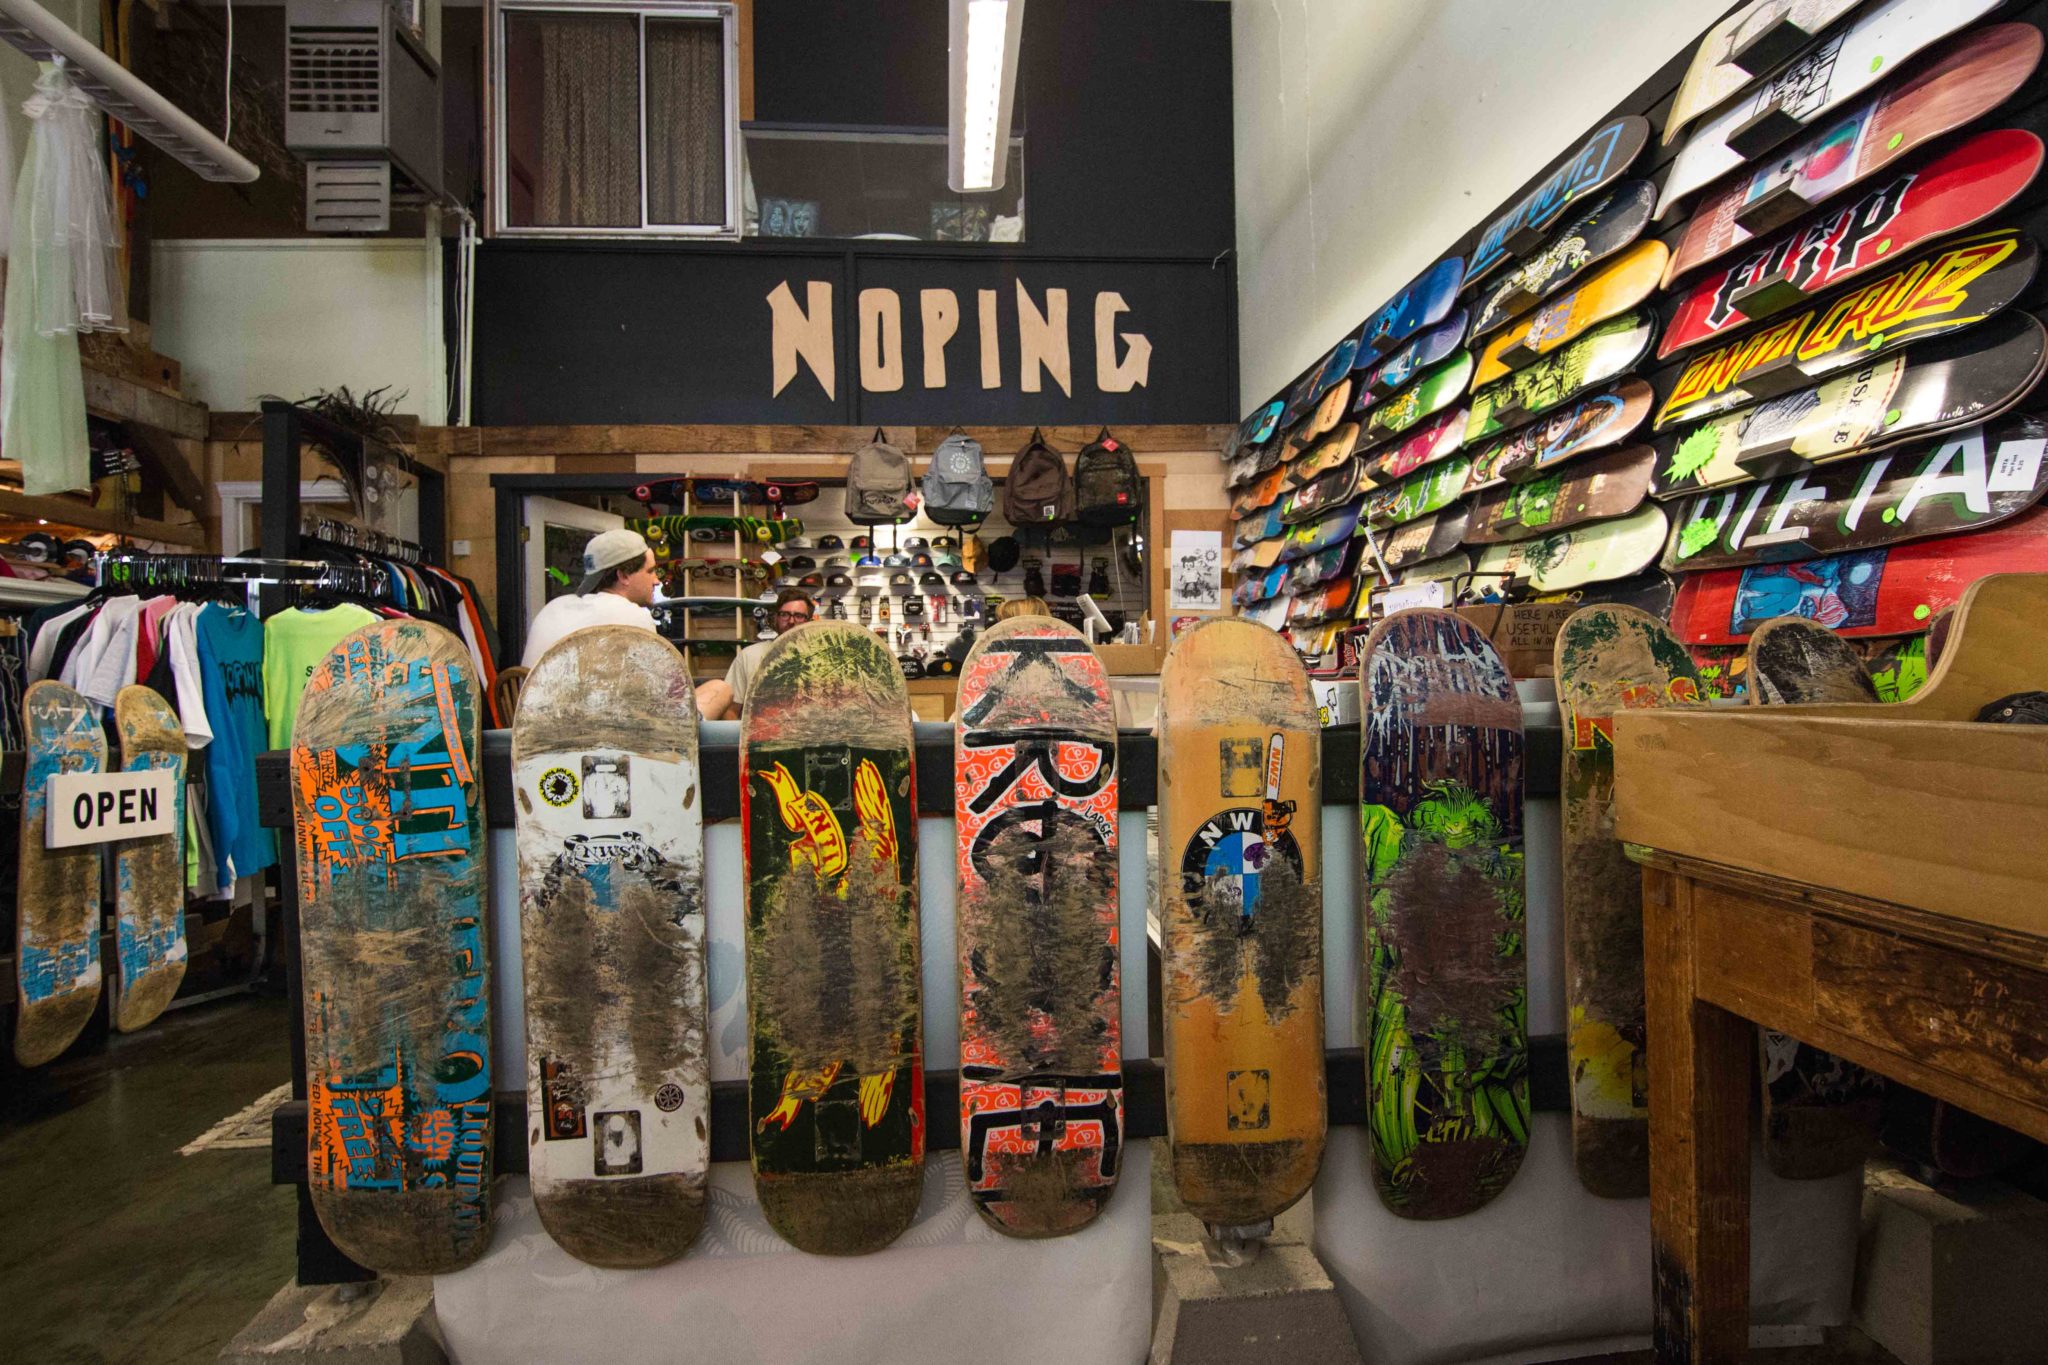 Noping: The Shop More than Just Skateboards - ThurstonTalk